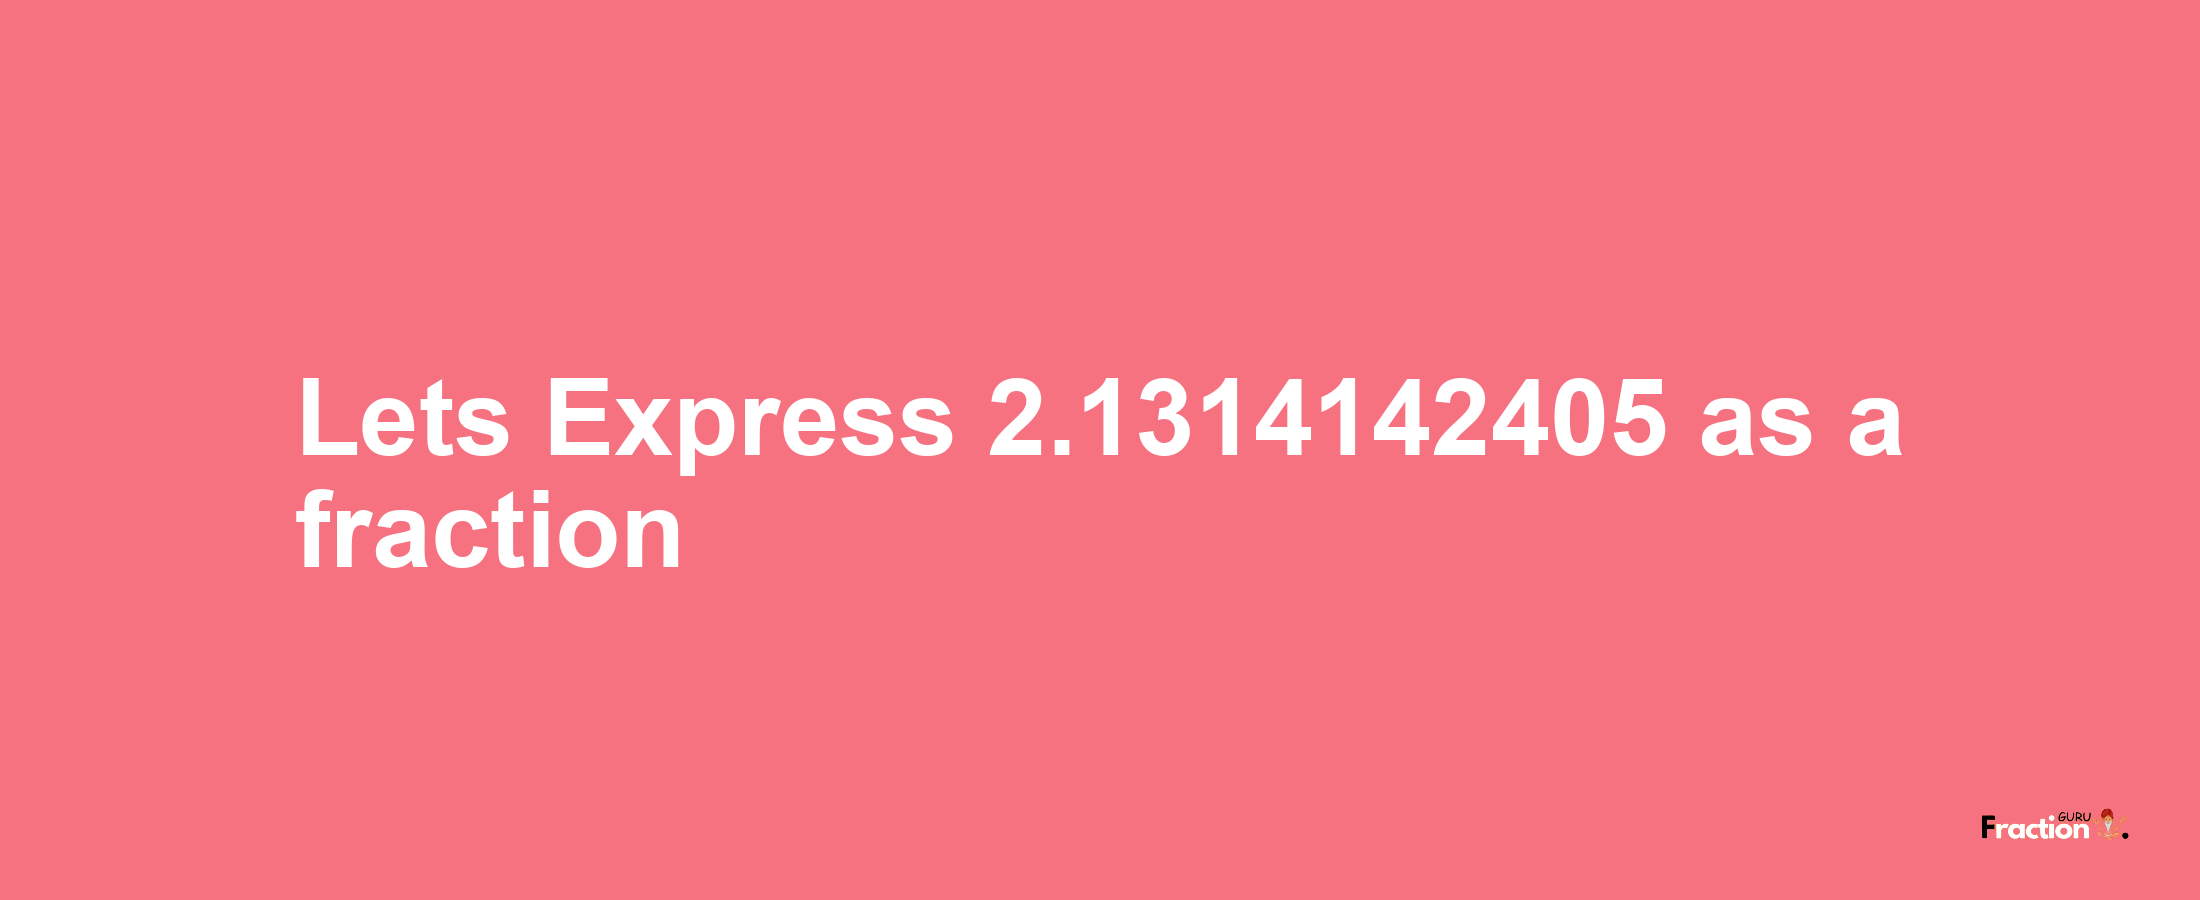 Lets Express 2.1314142405 as afraction